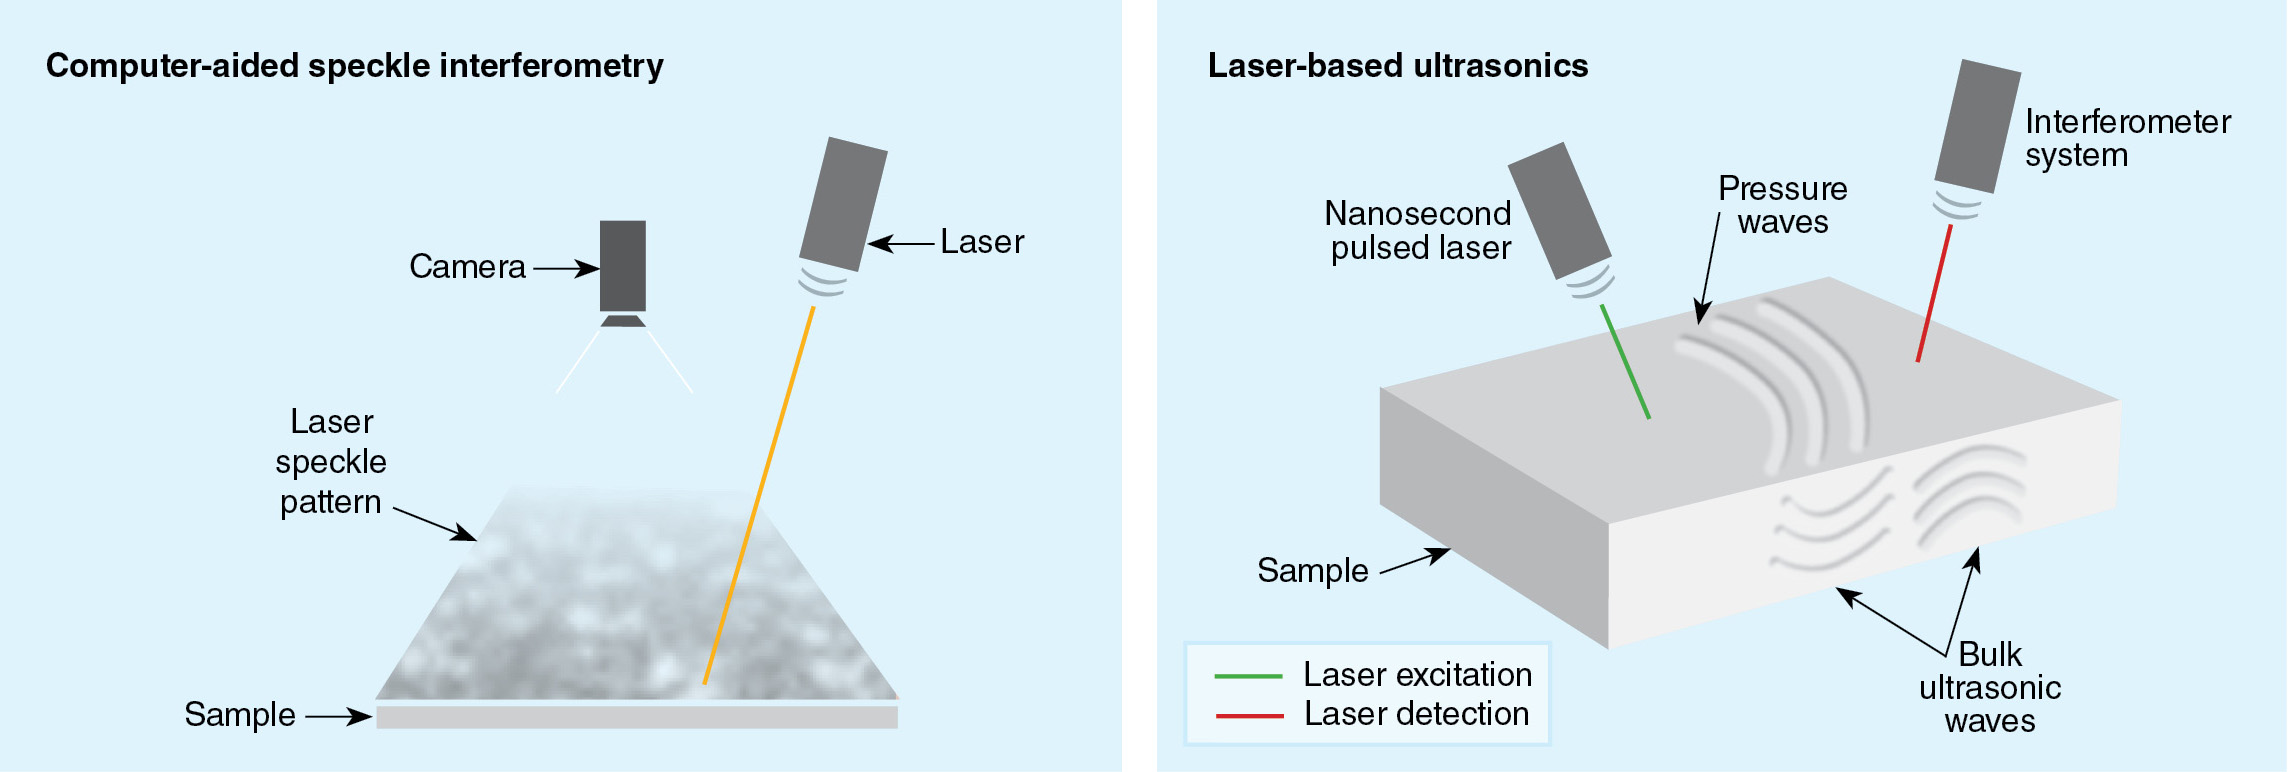 Illustrations of equipment used to image a material sample